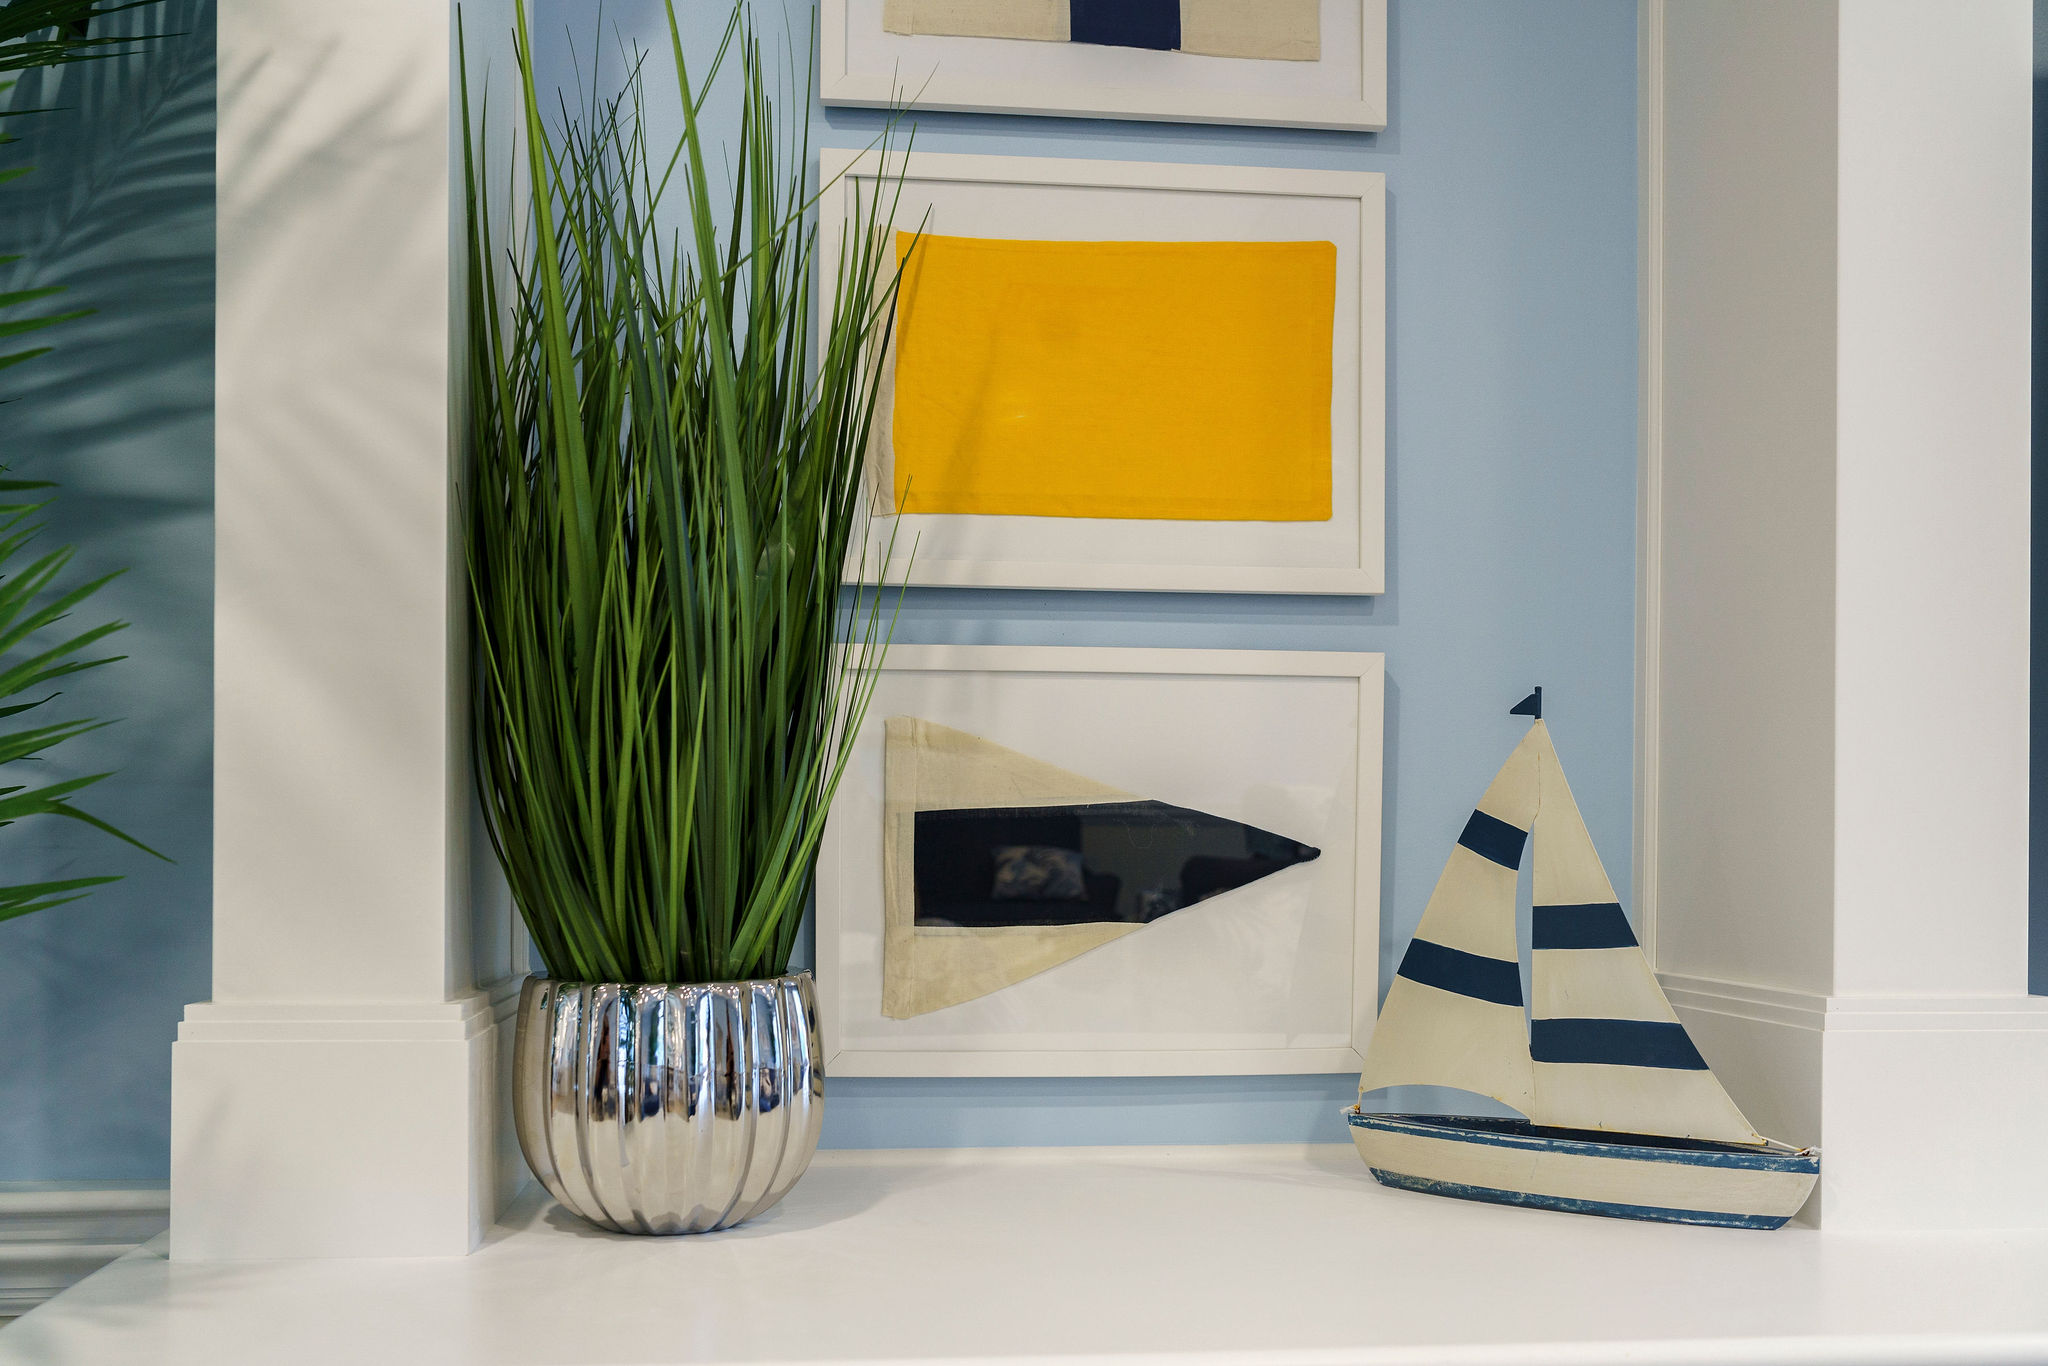 Shelf with plant, sailboat model, and artwork on the wall